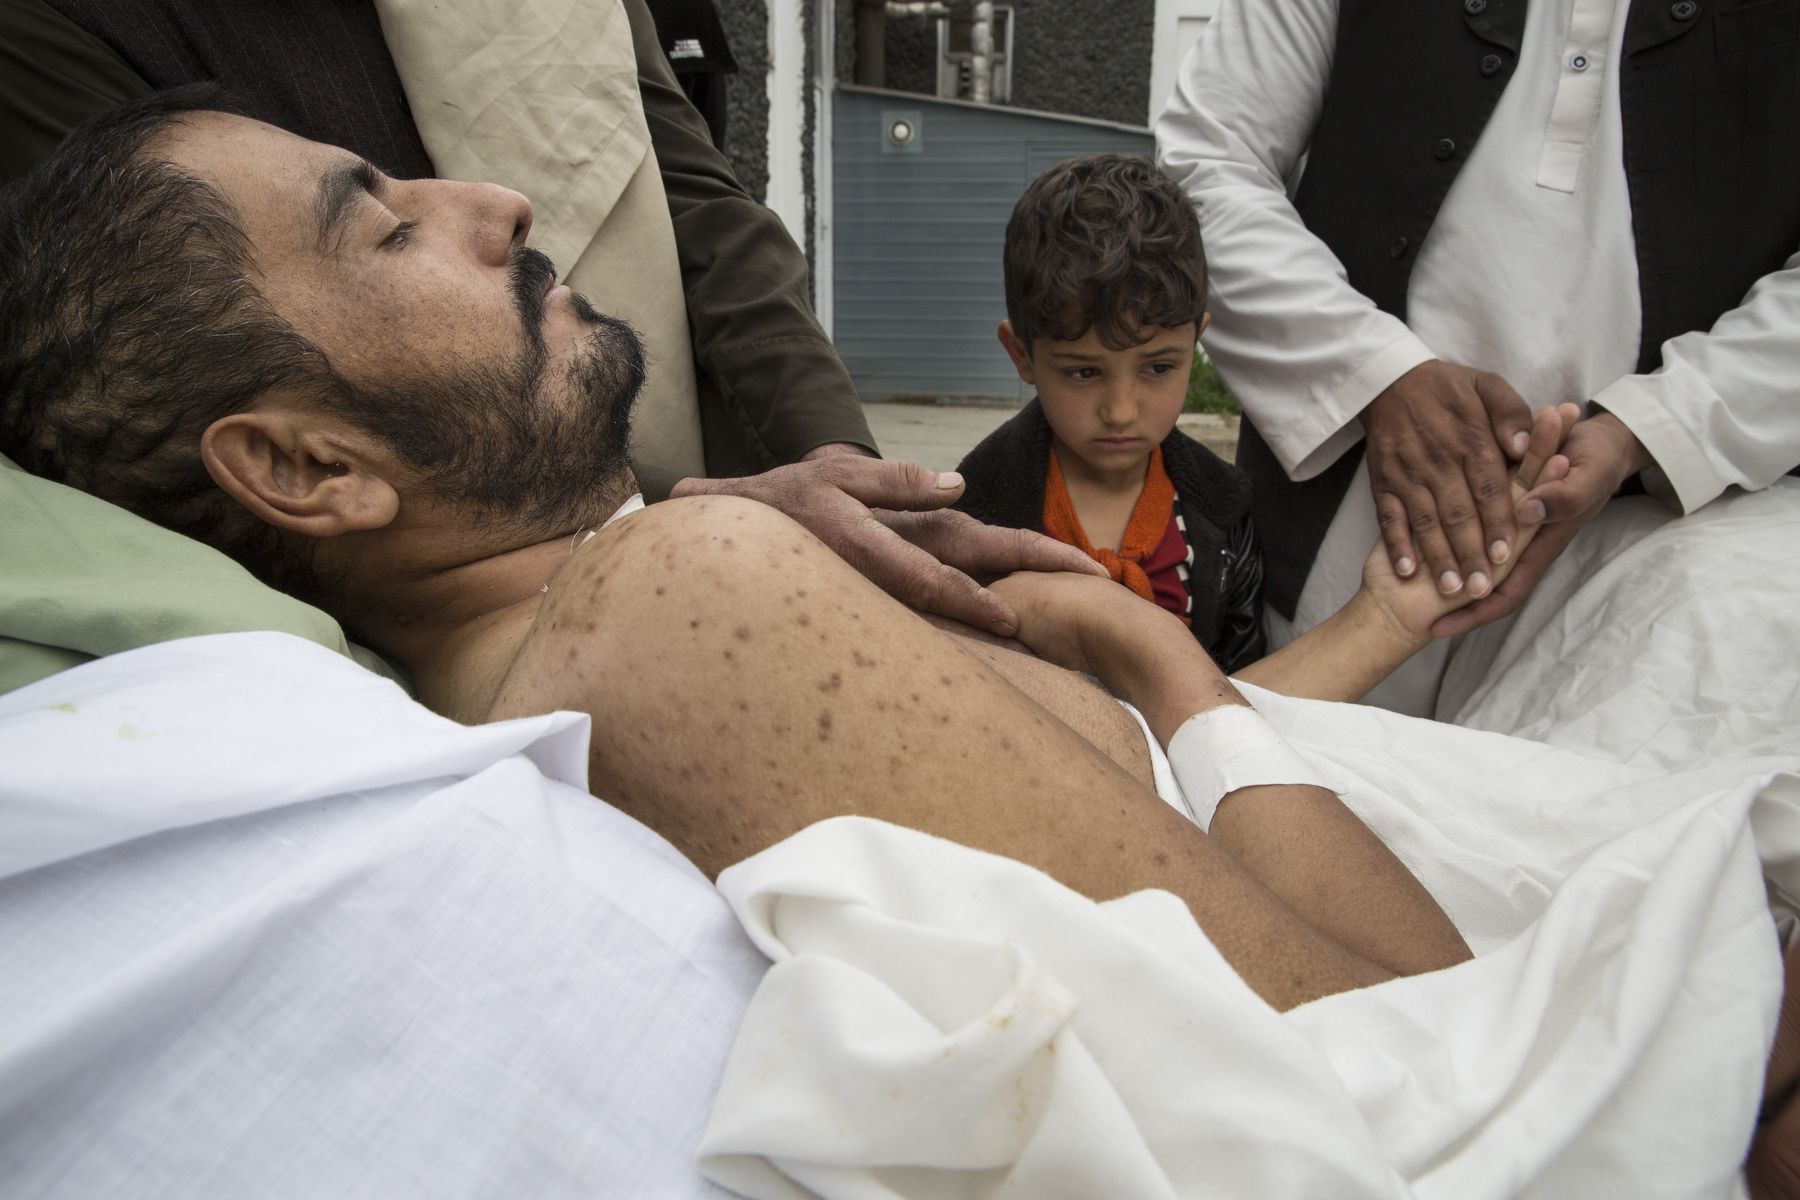 Khair Mohammed, 35, a paraplegic, lays in bed outside his ward as friends and relatives—including his daughter, Madina, 6—visit him at the emergency hospital in Kabul on March 28, 2016. Mohammed had barely escaped death after taking 3 bullets to his abdomen and skull. Image by Paula Bronstein. Afghanistan, 2016.